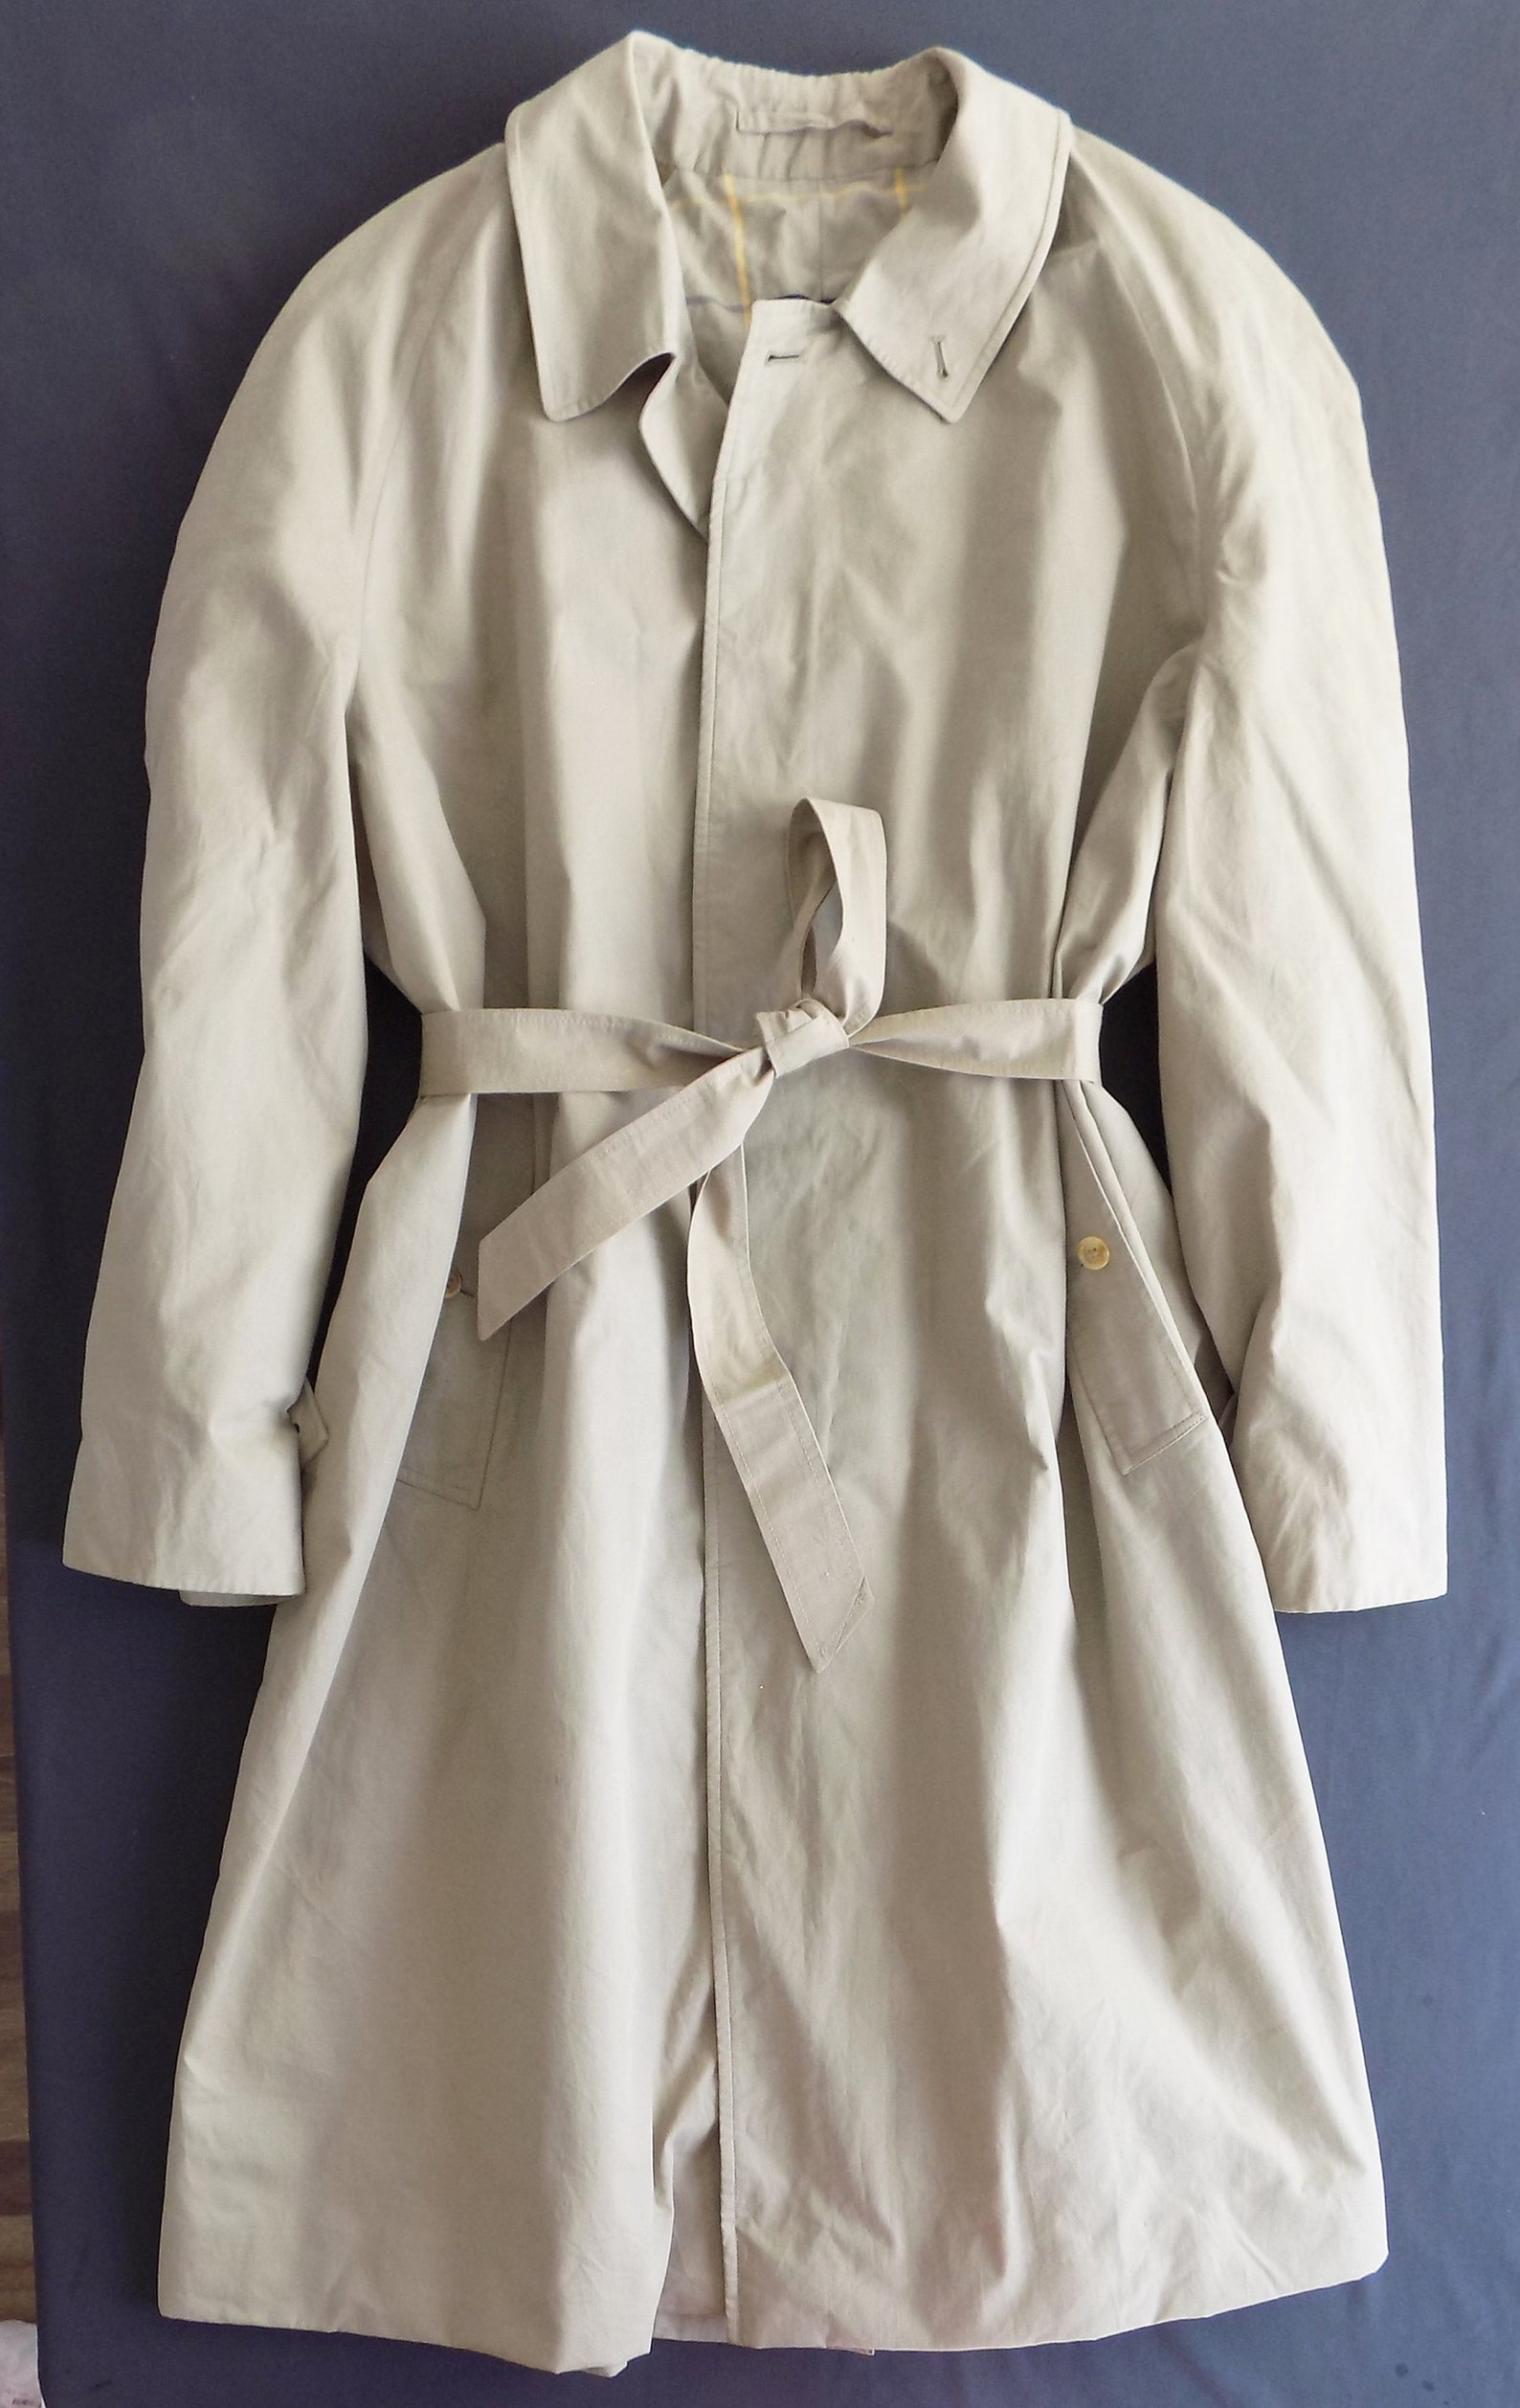 Vintage Burberry trench coat | Etsy